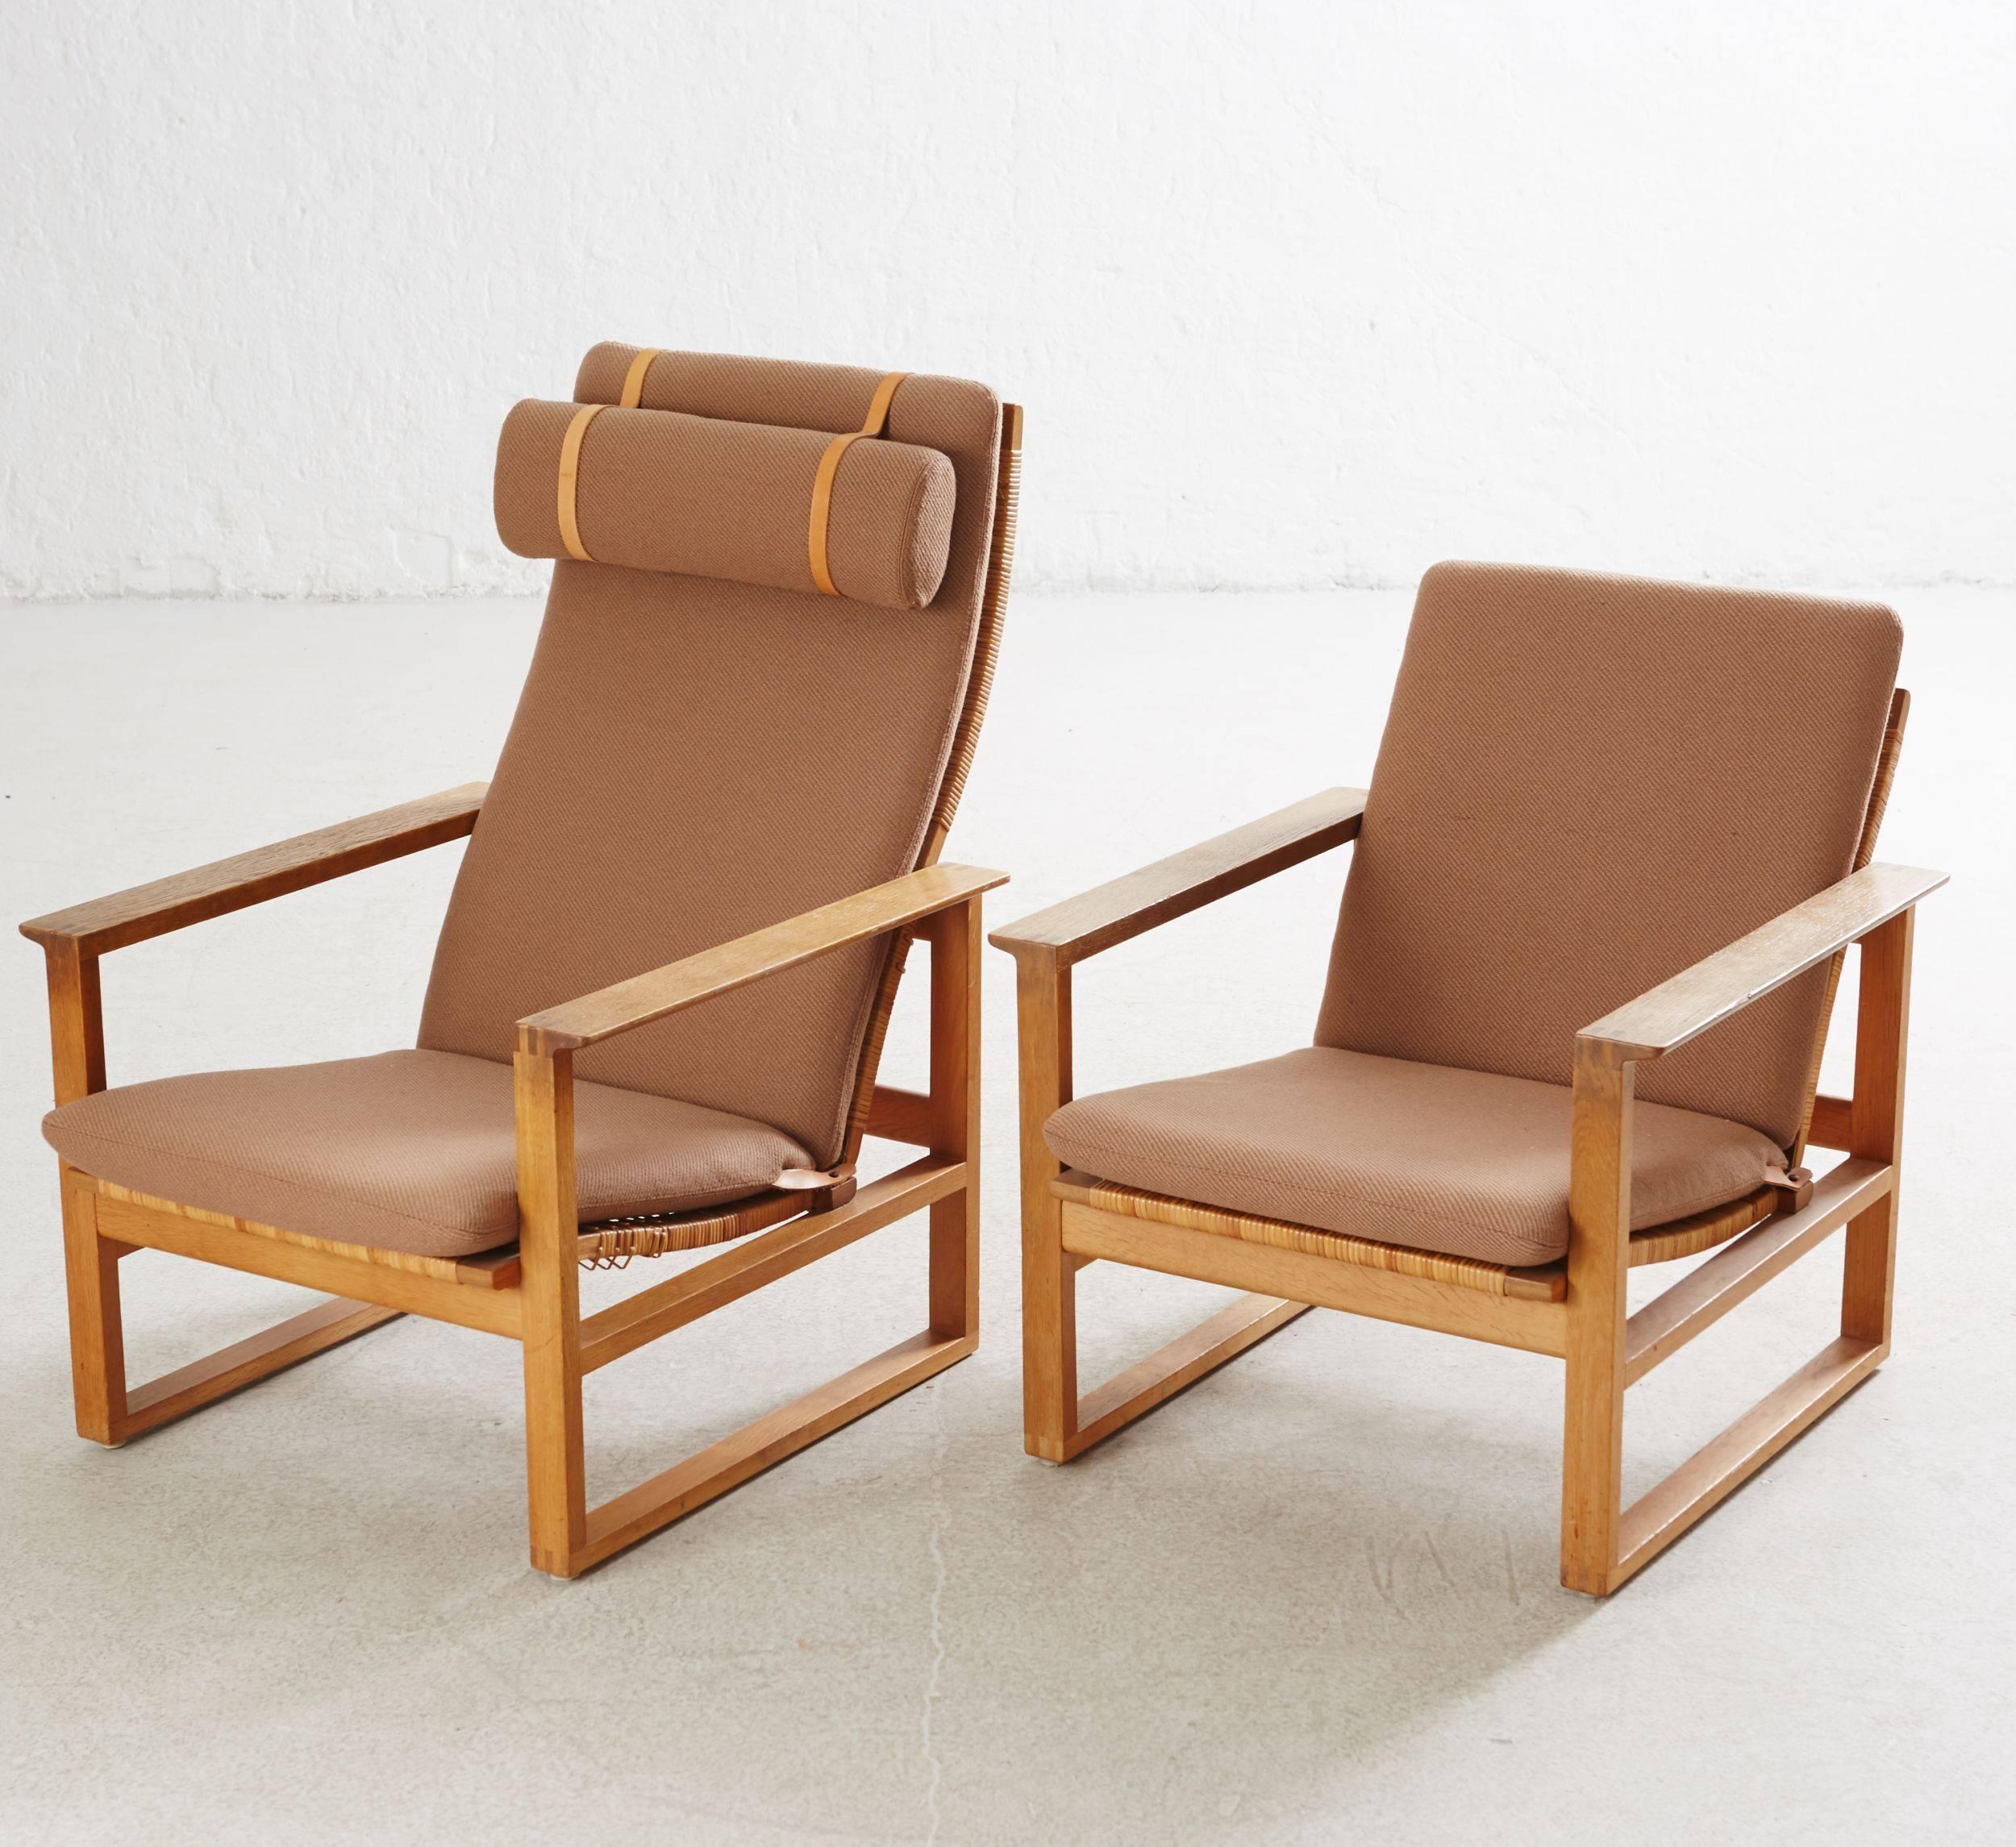 Pair of modern Mid-Century armchairs model 2254 and 2256 designed by Borge Mogensen for Fredericia Furniture. Manufactured in solid oak and rattan. Upholstered in original light brown wool.